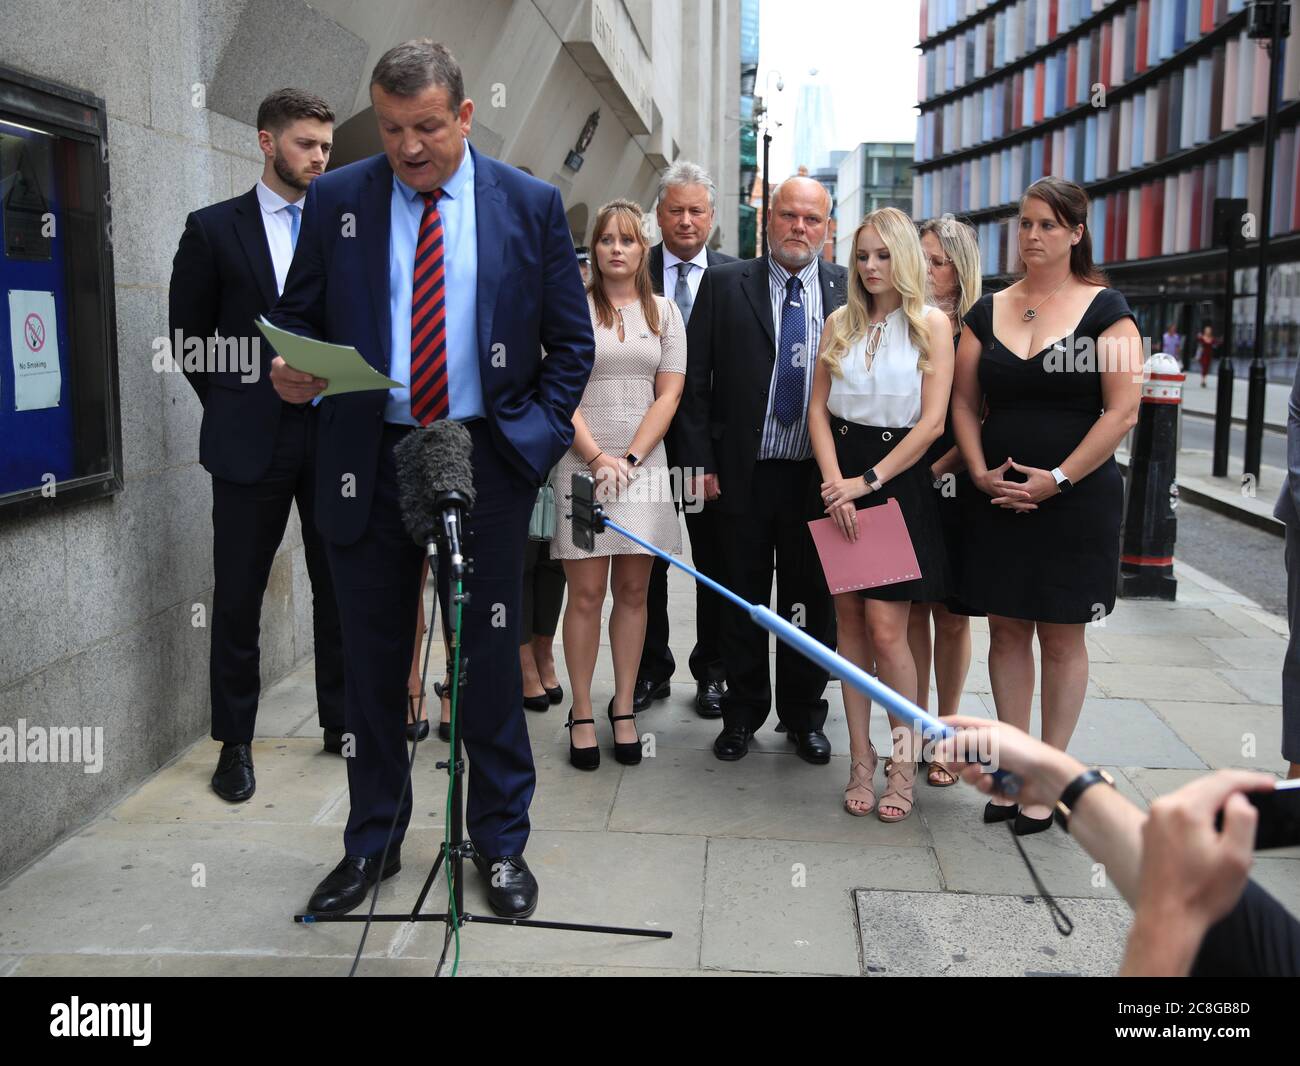 Thames Valley Police Senior Investigating Officer, Detective Superintendent Stuart Blaik, is watched by Lissie Harper (second right), the widow of Pc Andrew Harper, as he speaks to the media outside the Old Bailey in London, after driver Henry Long, 19, who dragged Pc Andrew Harper to his death, was found not guilty of murder but had earlier pleaded guilty to manslaughter and his passengers Jessie Cole and Albert Bowers, both 18, were cleared of murder but found guilty of manslaughter. Stock Photo